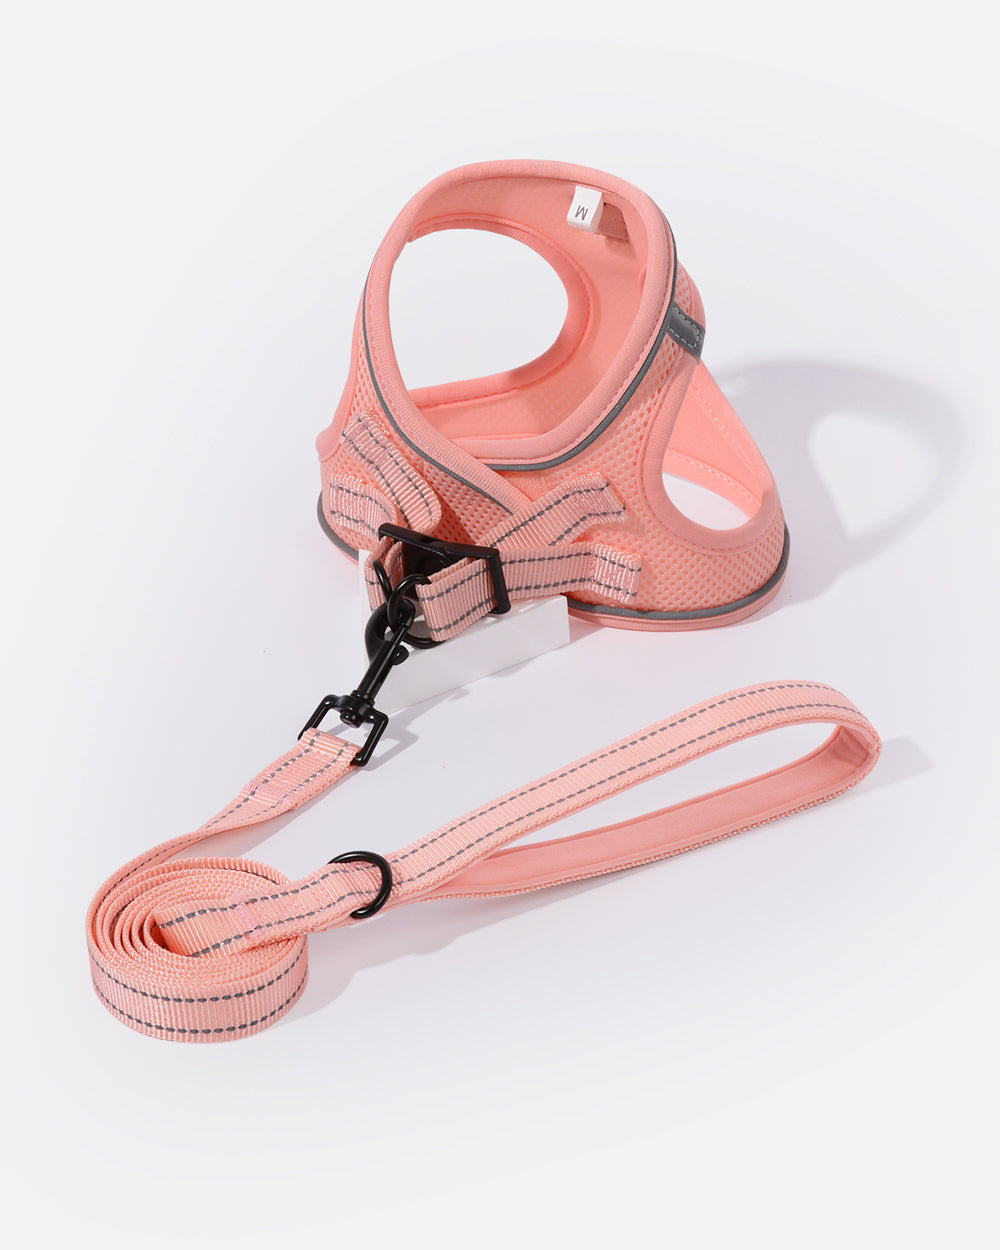 OxyMesh Velcro Step-in Harness and Leash Set - Coral Pink